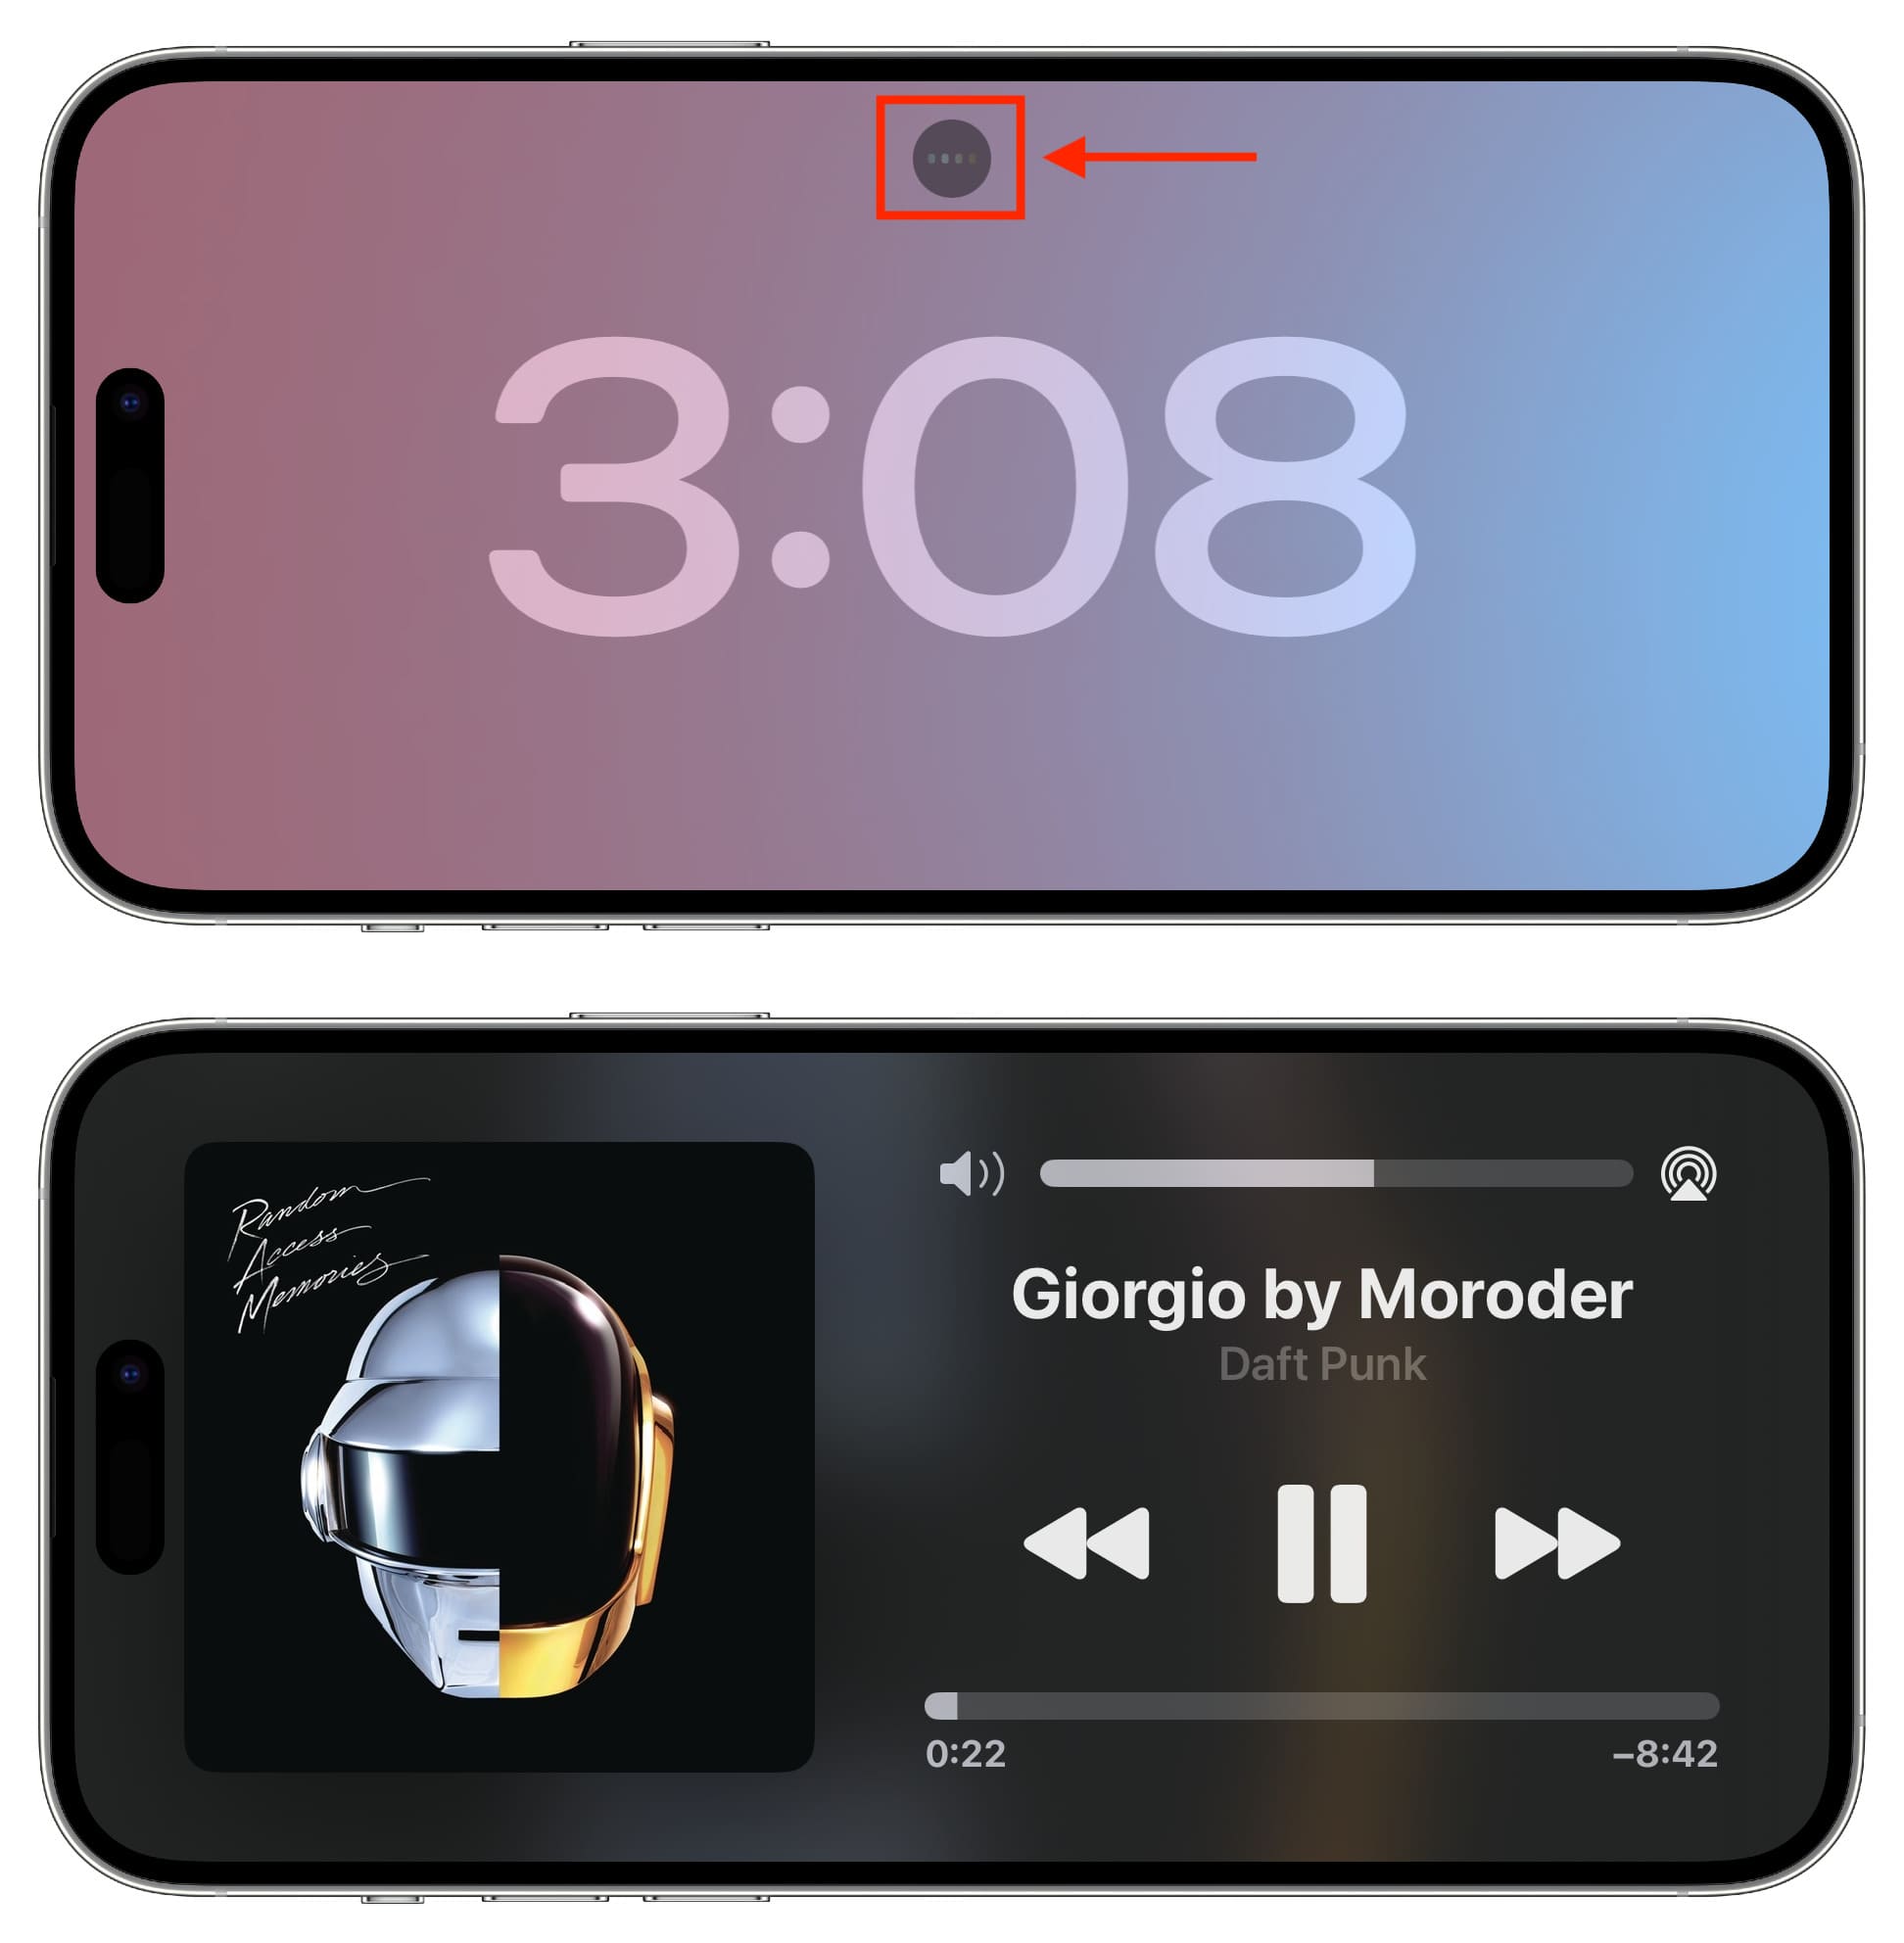 Music controls on StandBy screen on iPhone